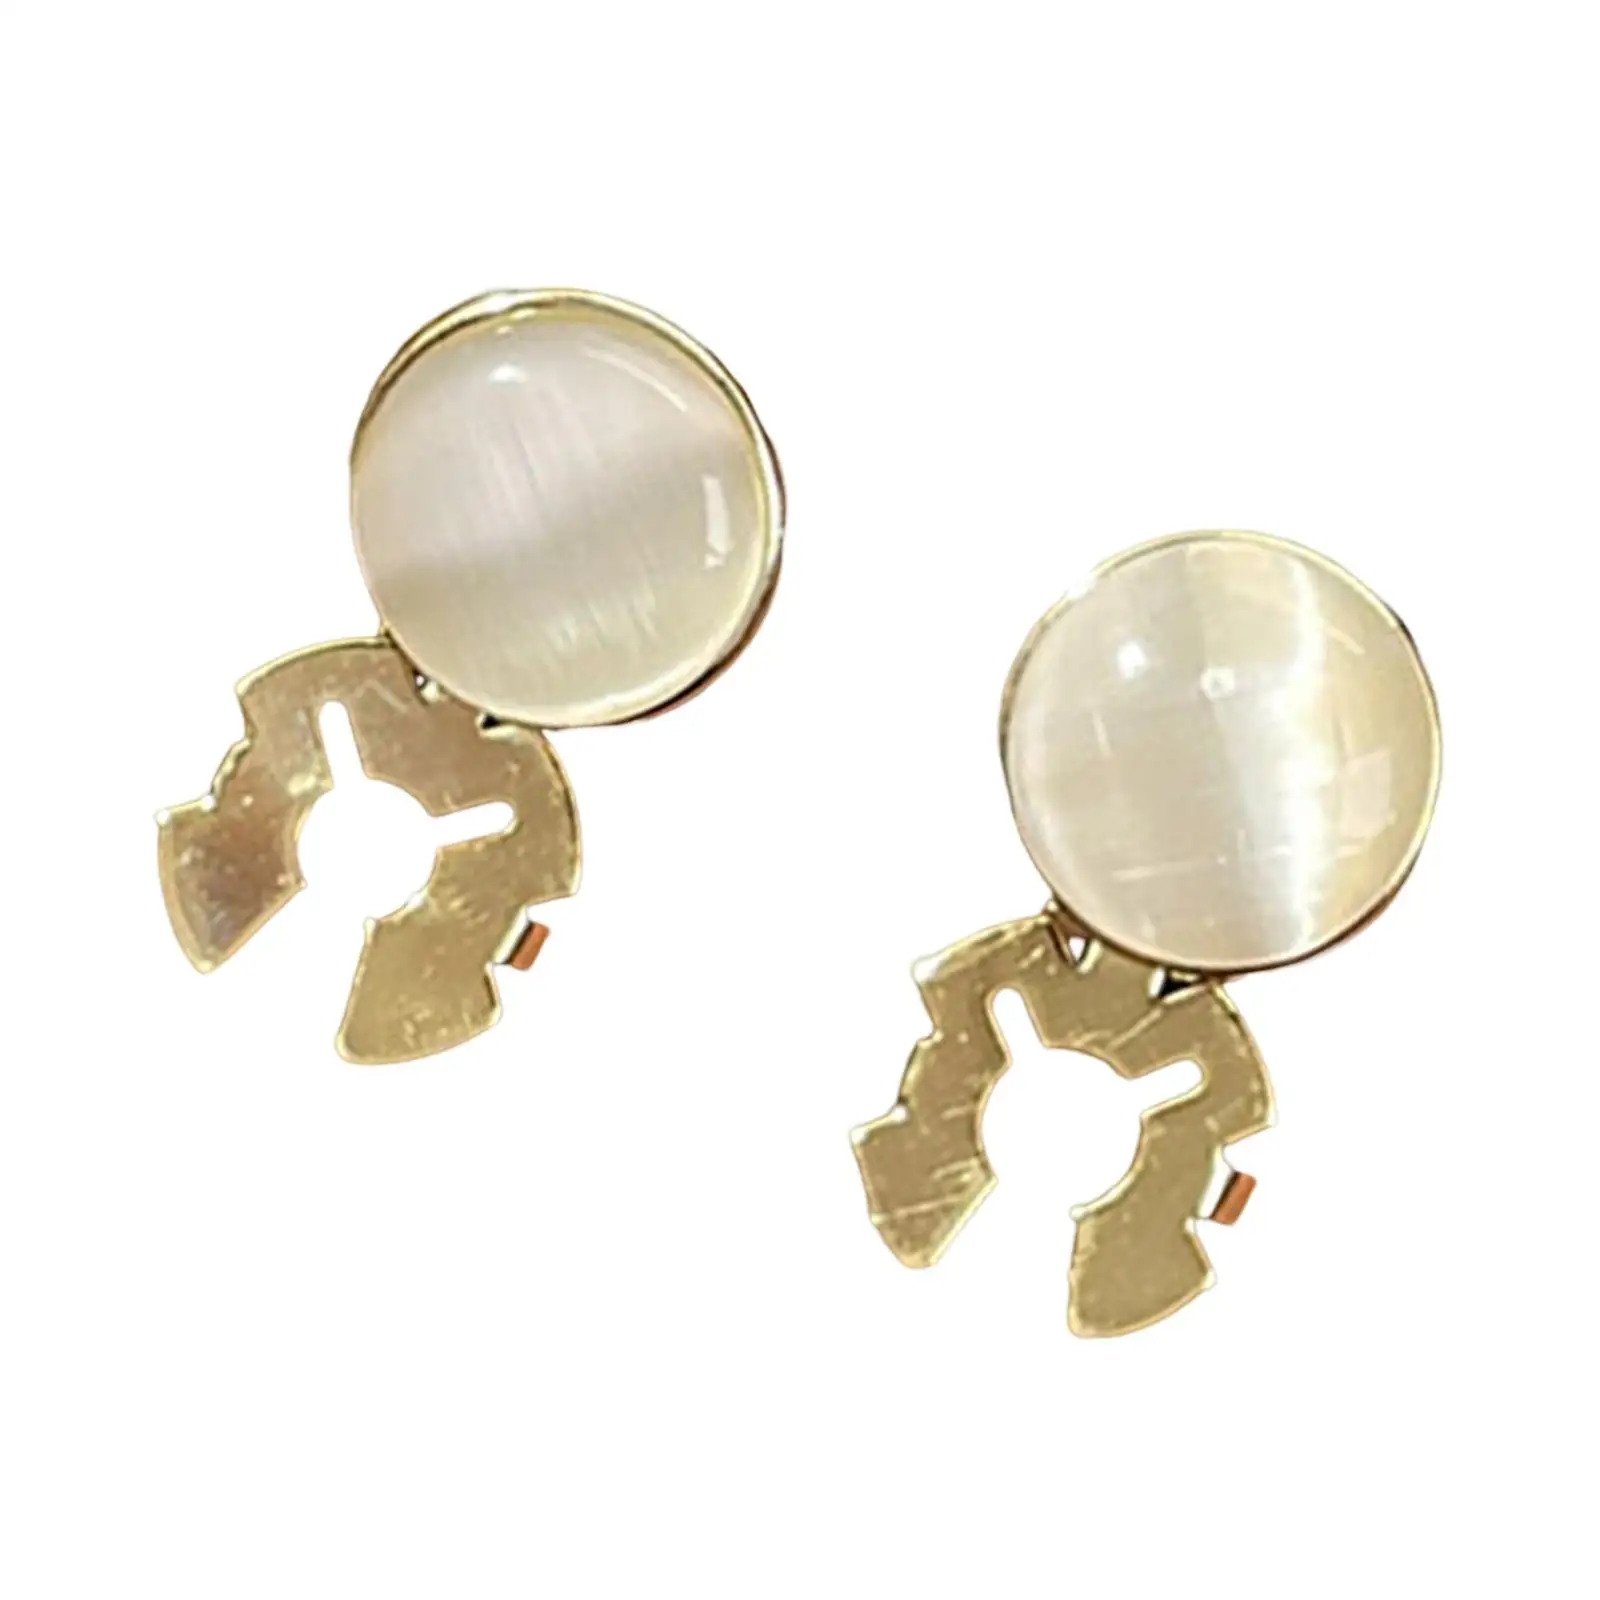 2 Pieces Classic Men Cufflink Circular Formal Decorative Button Covers for Clothing Accessories Travel Holidays Business Gift